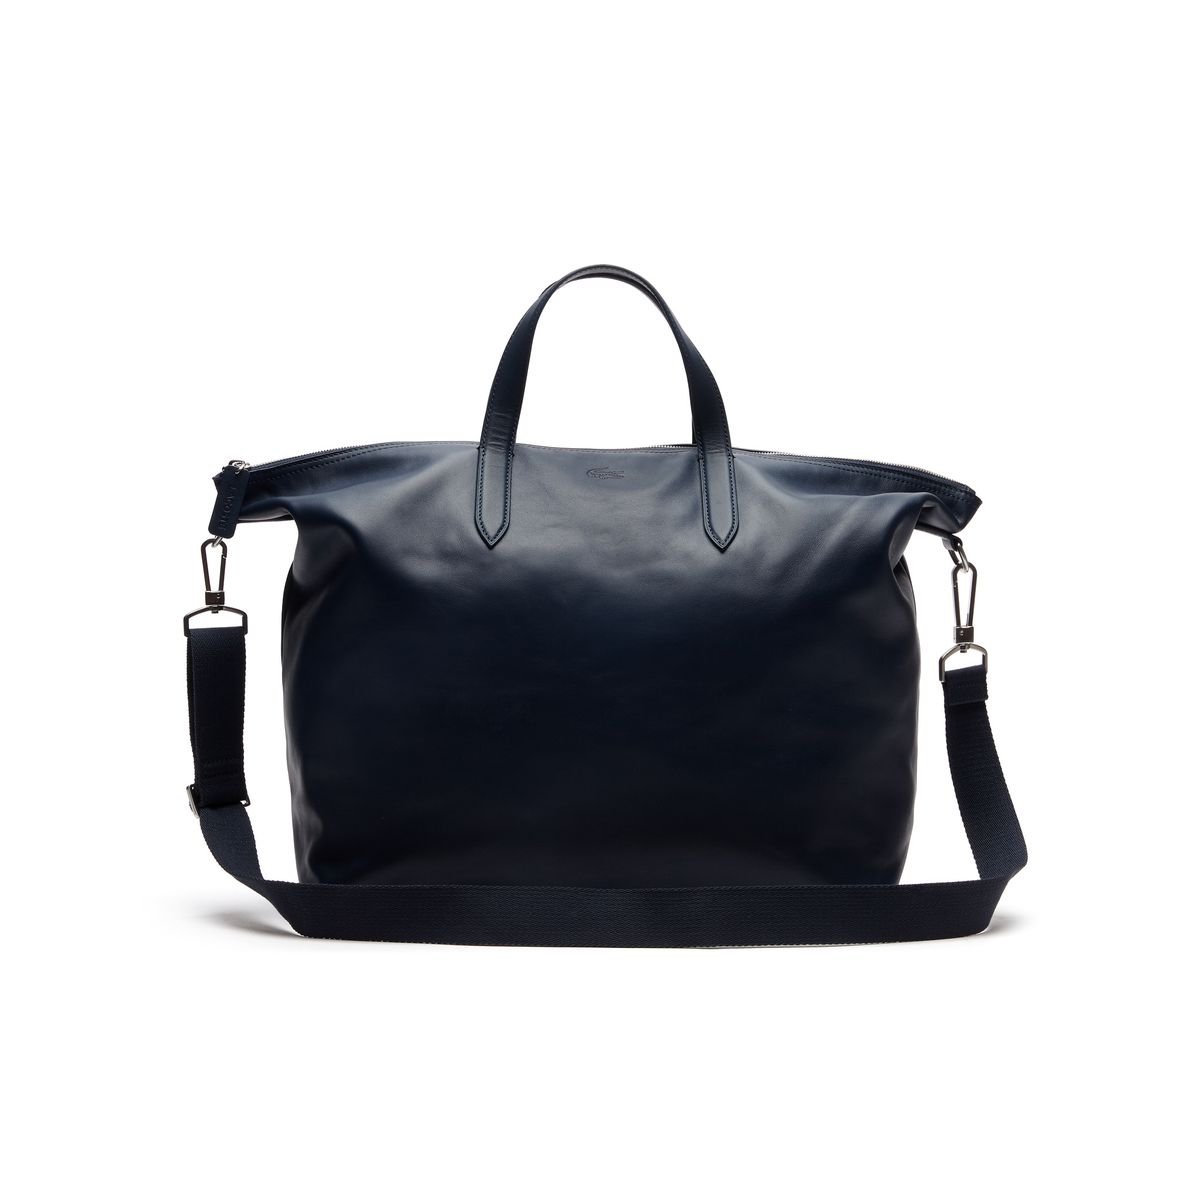 Limited-Edition 85th Anniversary Leather Weekend Bag